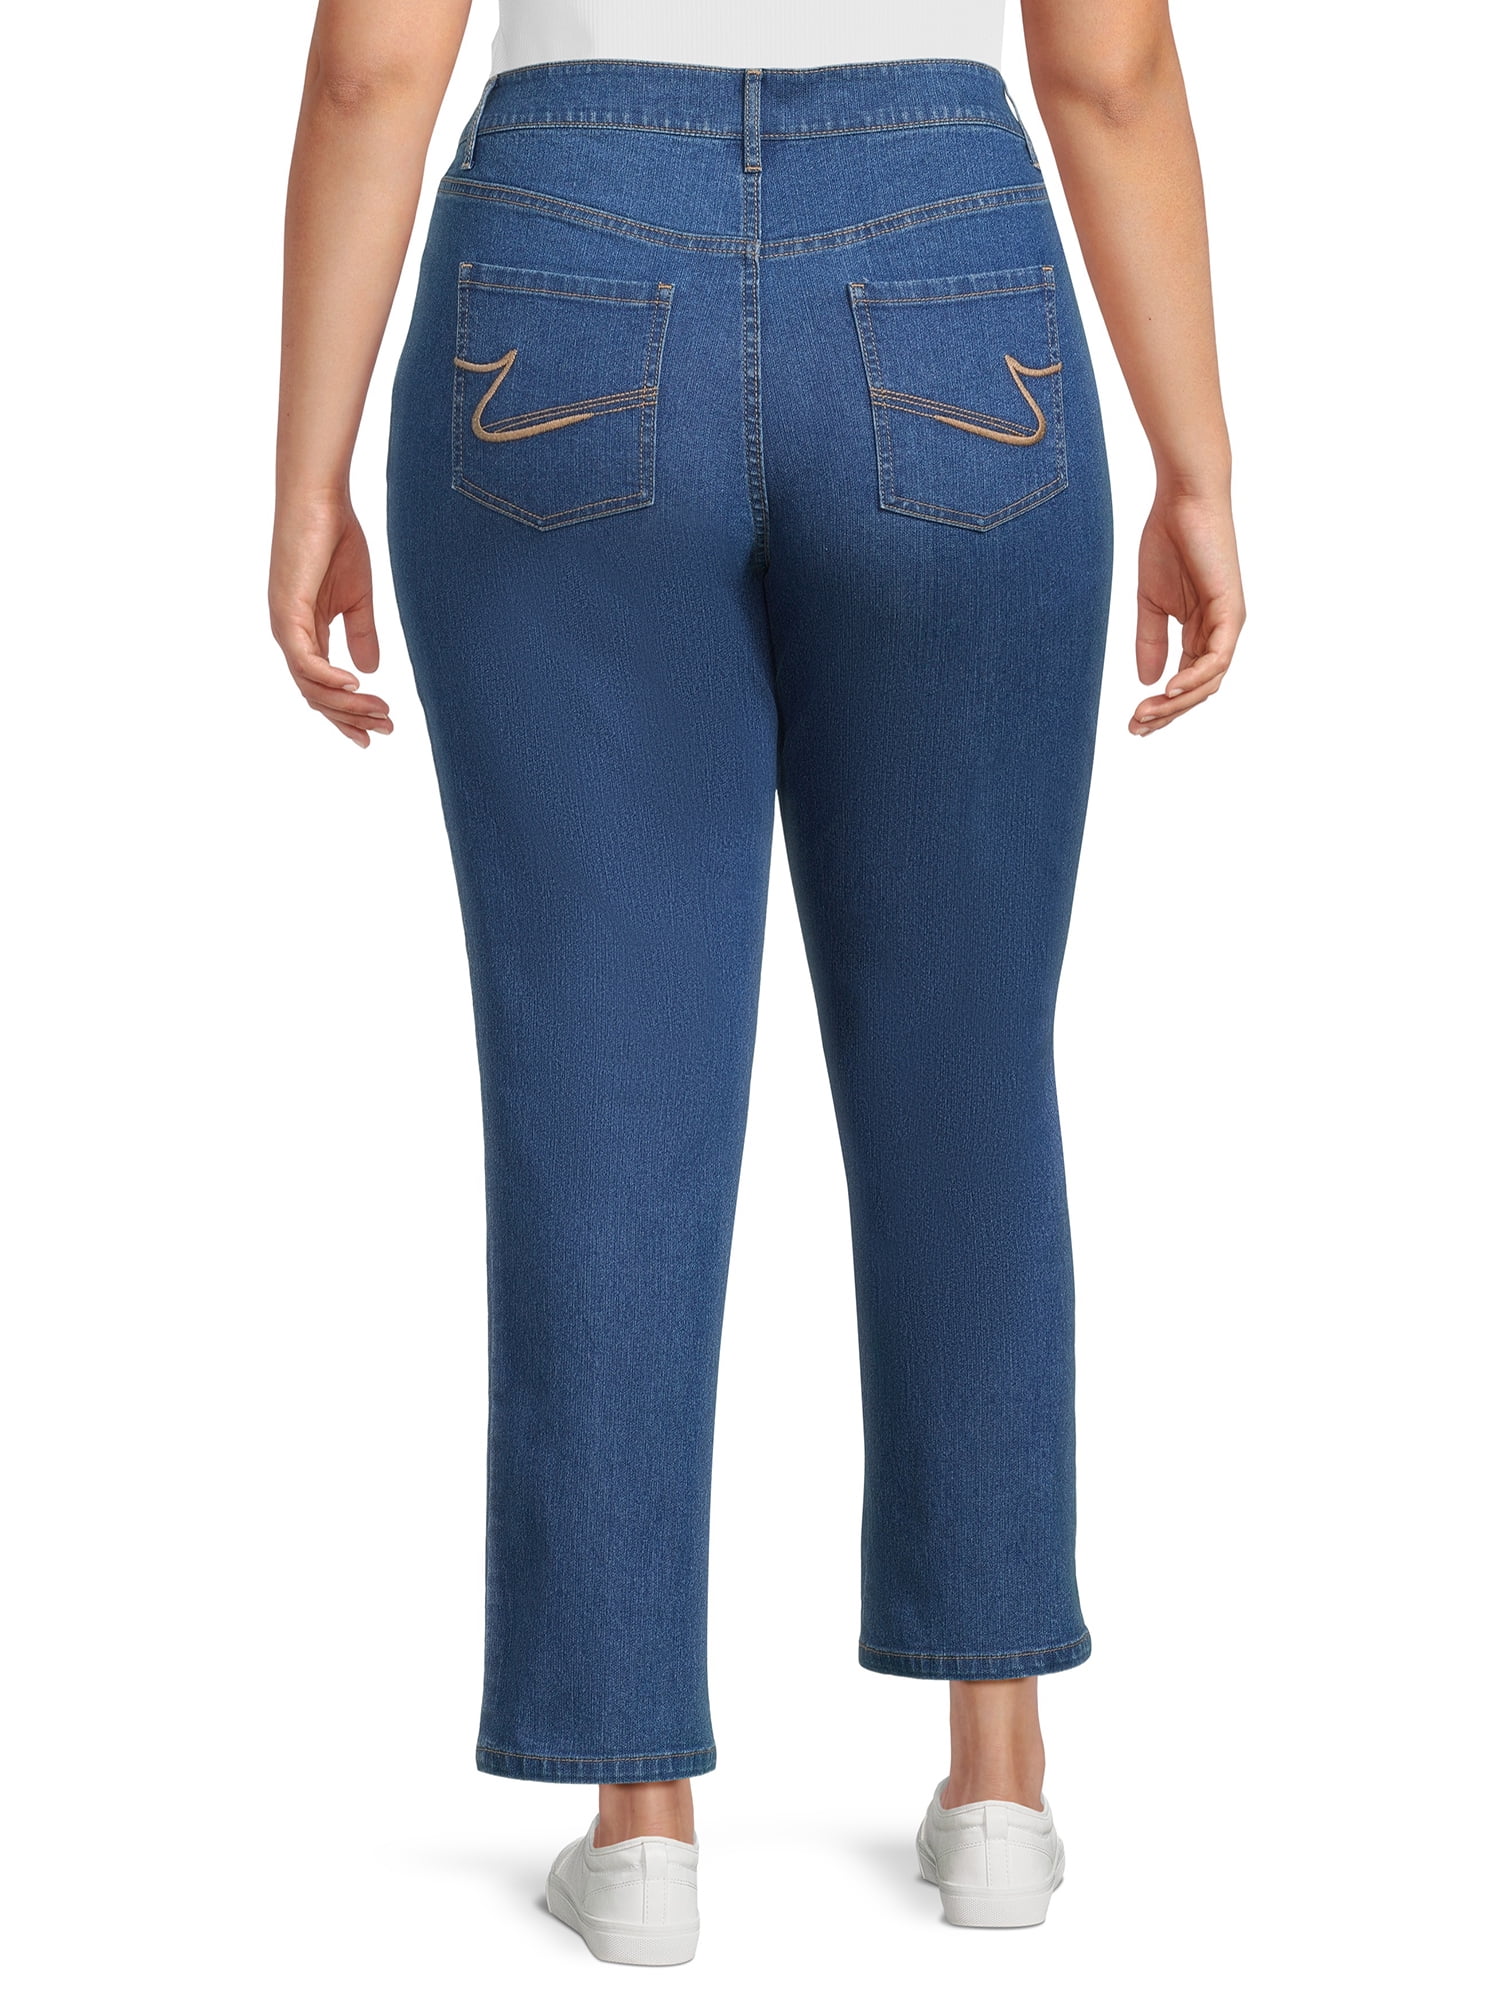 Just My Size Women's Plus Size 5 Pocket Stretch Jean, Also in Petite 